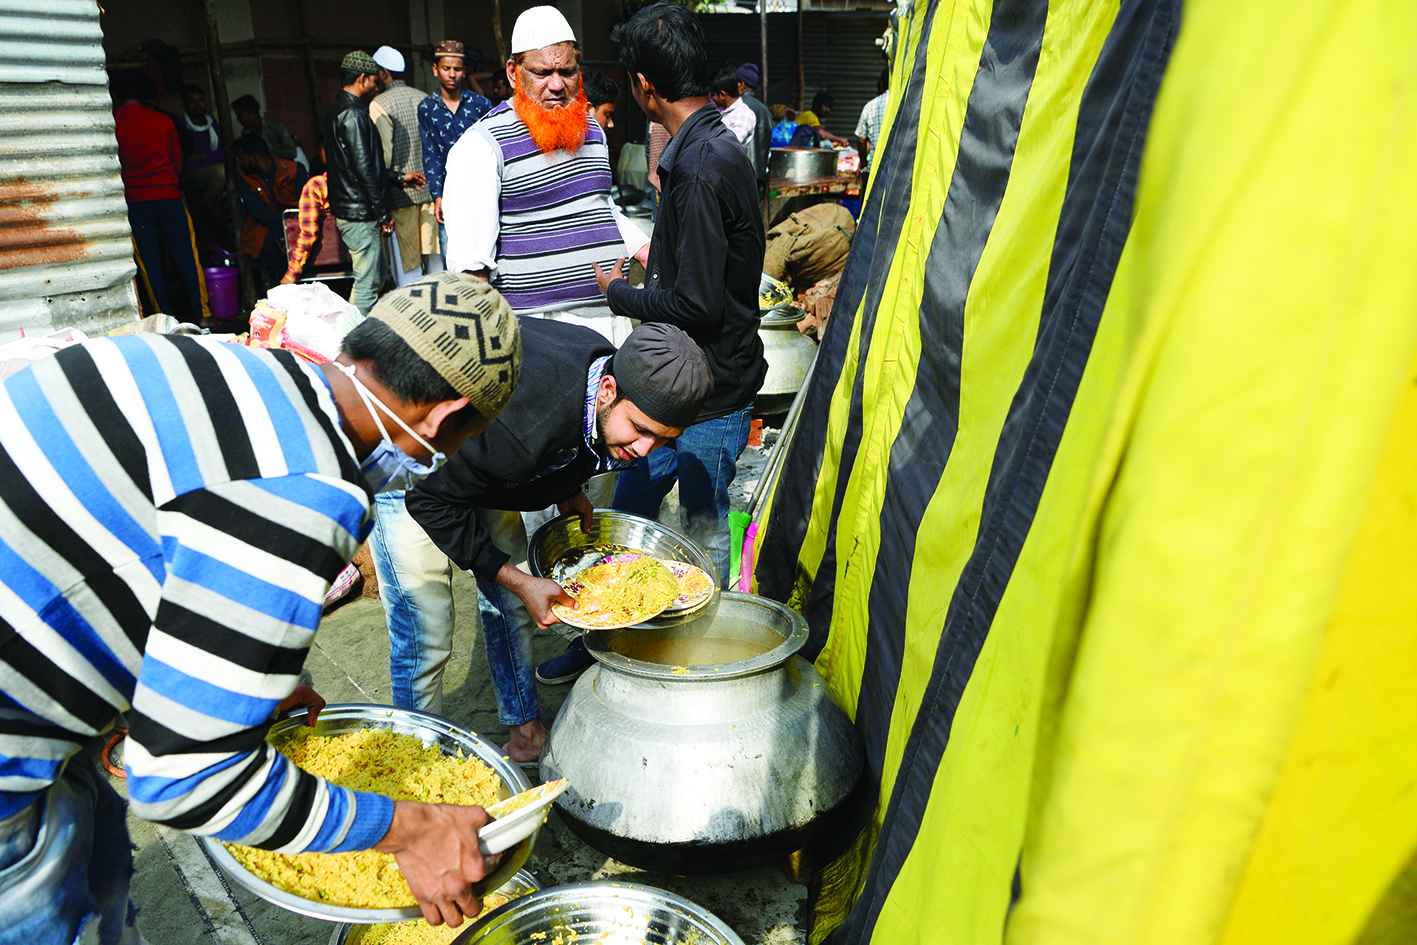 Volunteers serves food for displaced people of last week's sectarian riots in India's capital over the controversial citizenship law, at Eidgah Masjid in Mustafabad area of New Delhi on March 5, 2020. (Photo by Sajjad HUSSAIN / AFP)